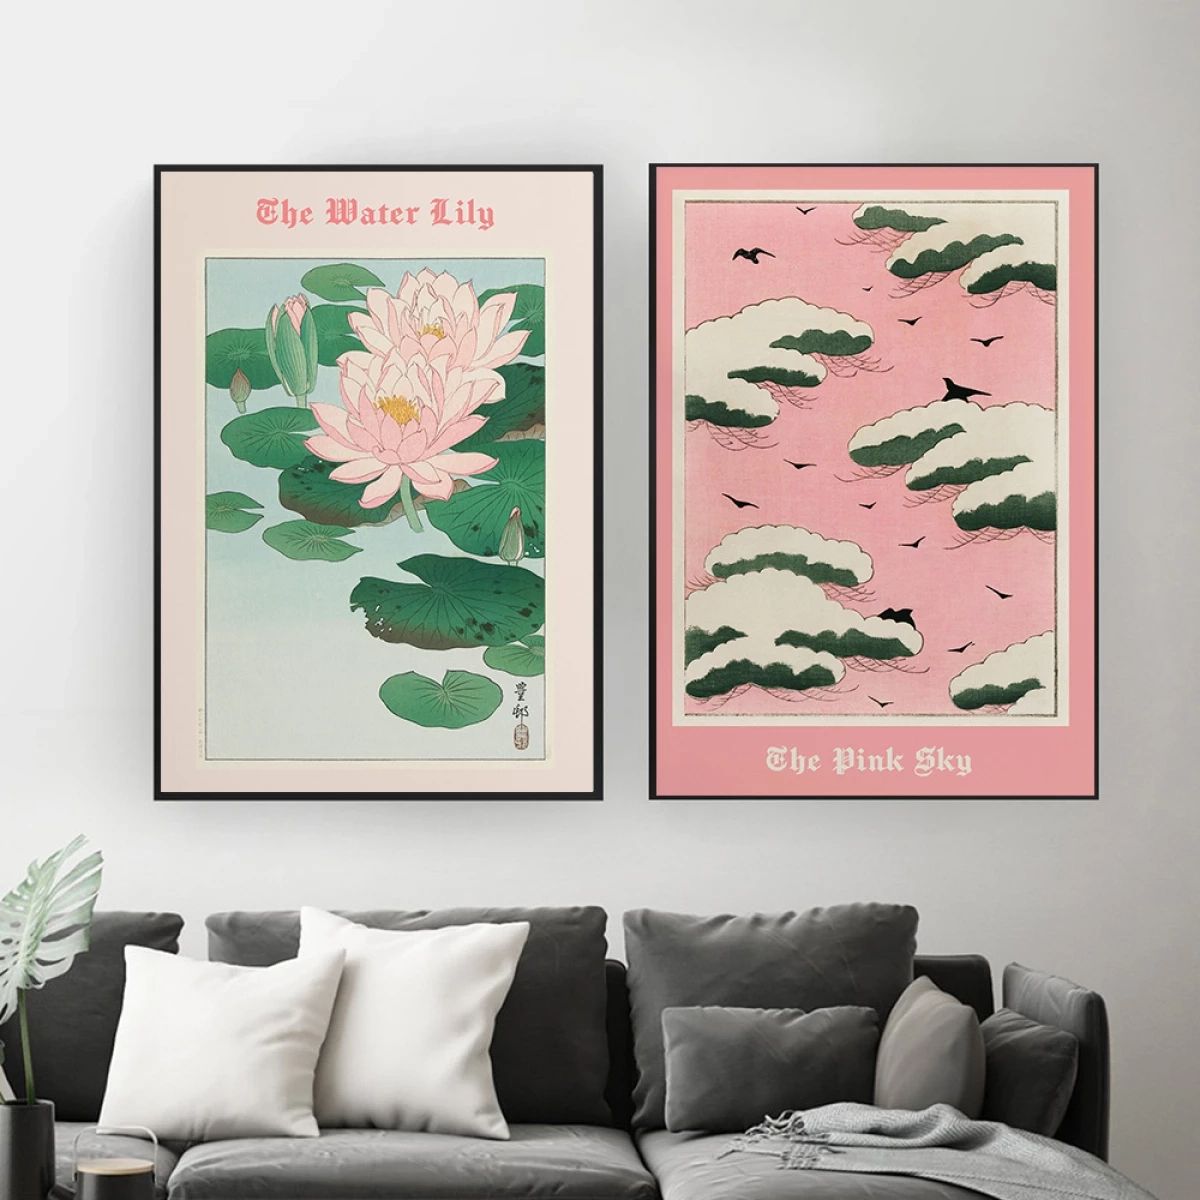 Pink Sky Water Lily Posters Print Vintage Japanese Wall Art Cover Magazine  Canvas Painting Exhibition Home Decoration Room|painting & Calligraphy| –  Aliexpress With Regard To Pink Sky Wall Art (View 14 of 15)